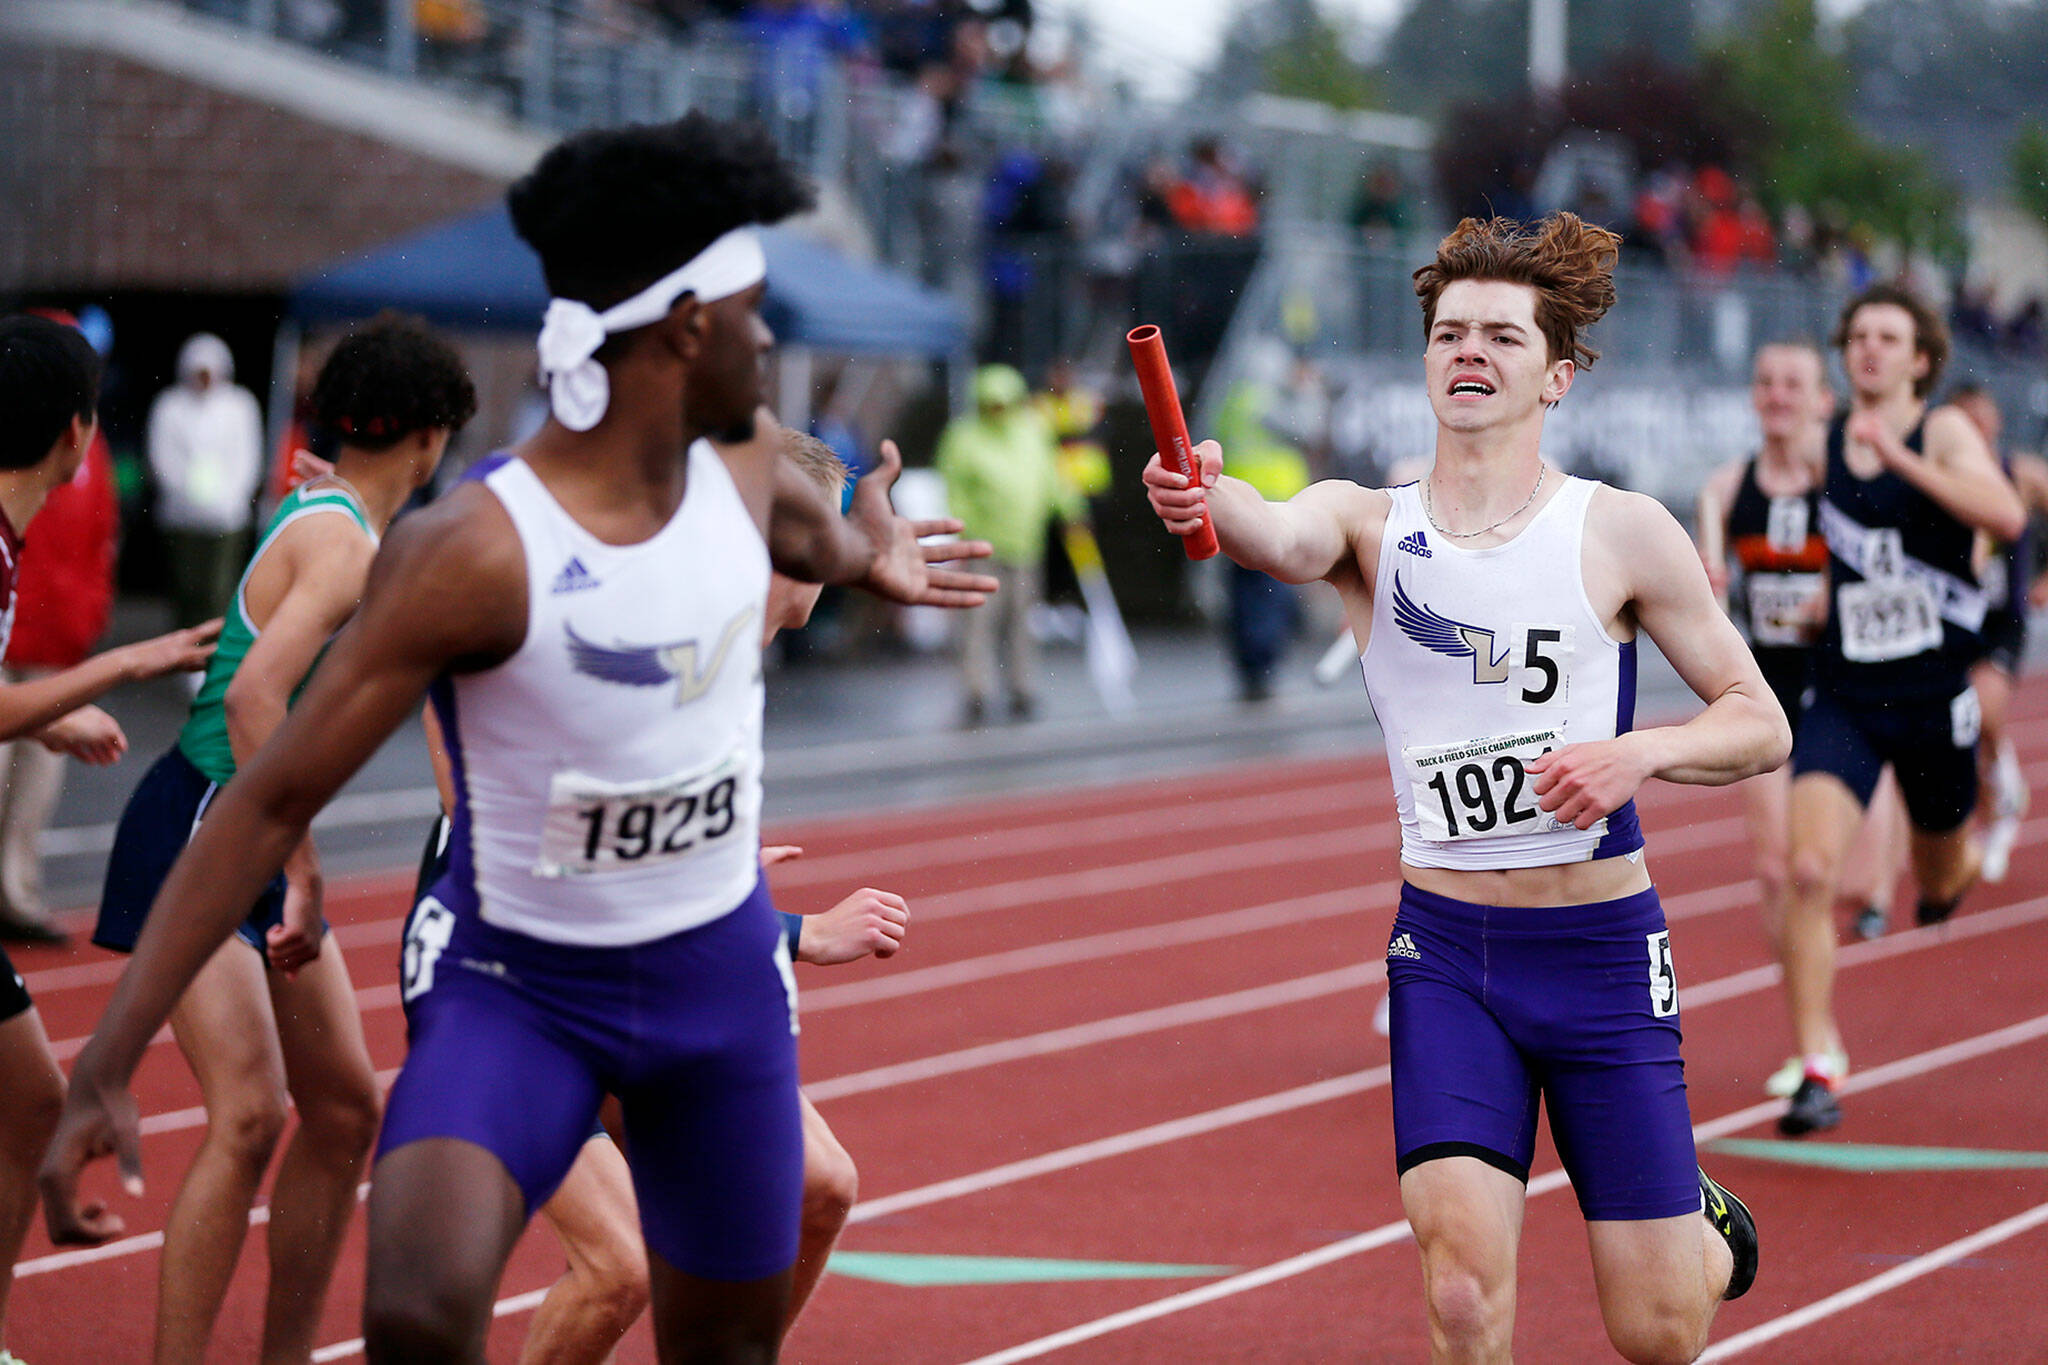 Lake Stevens’ Kaden Chidester hands off the baton to teammate Hamid Sylla during the 4A boys 4x400 relay Saturday, May 28, 2022, at the 2022 WIAA State Track & Field Championships at Mount Tahoma High School in Tacoma, Washington. (Ryan Berry / The Herald)